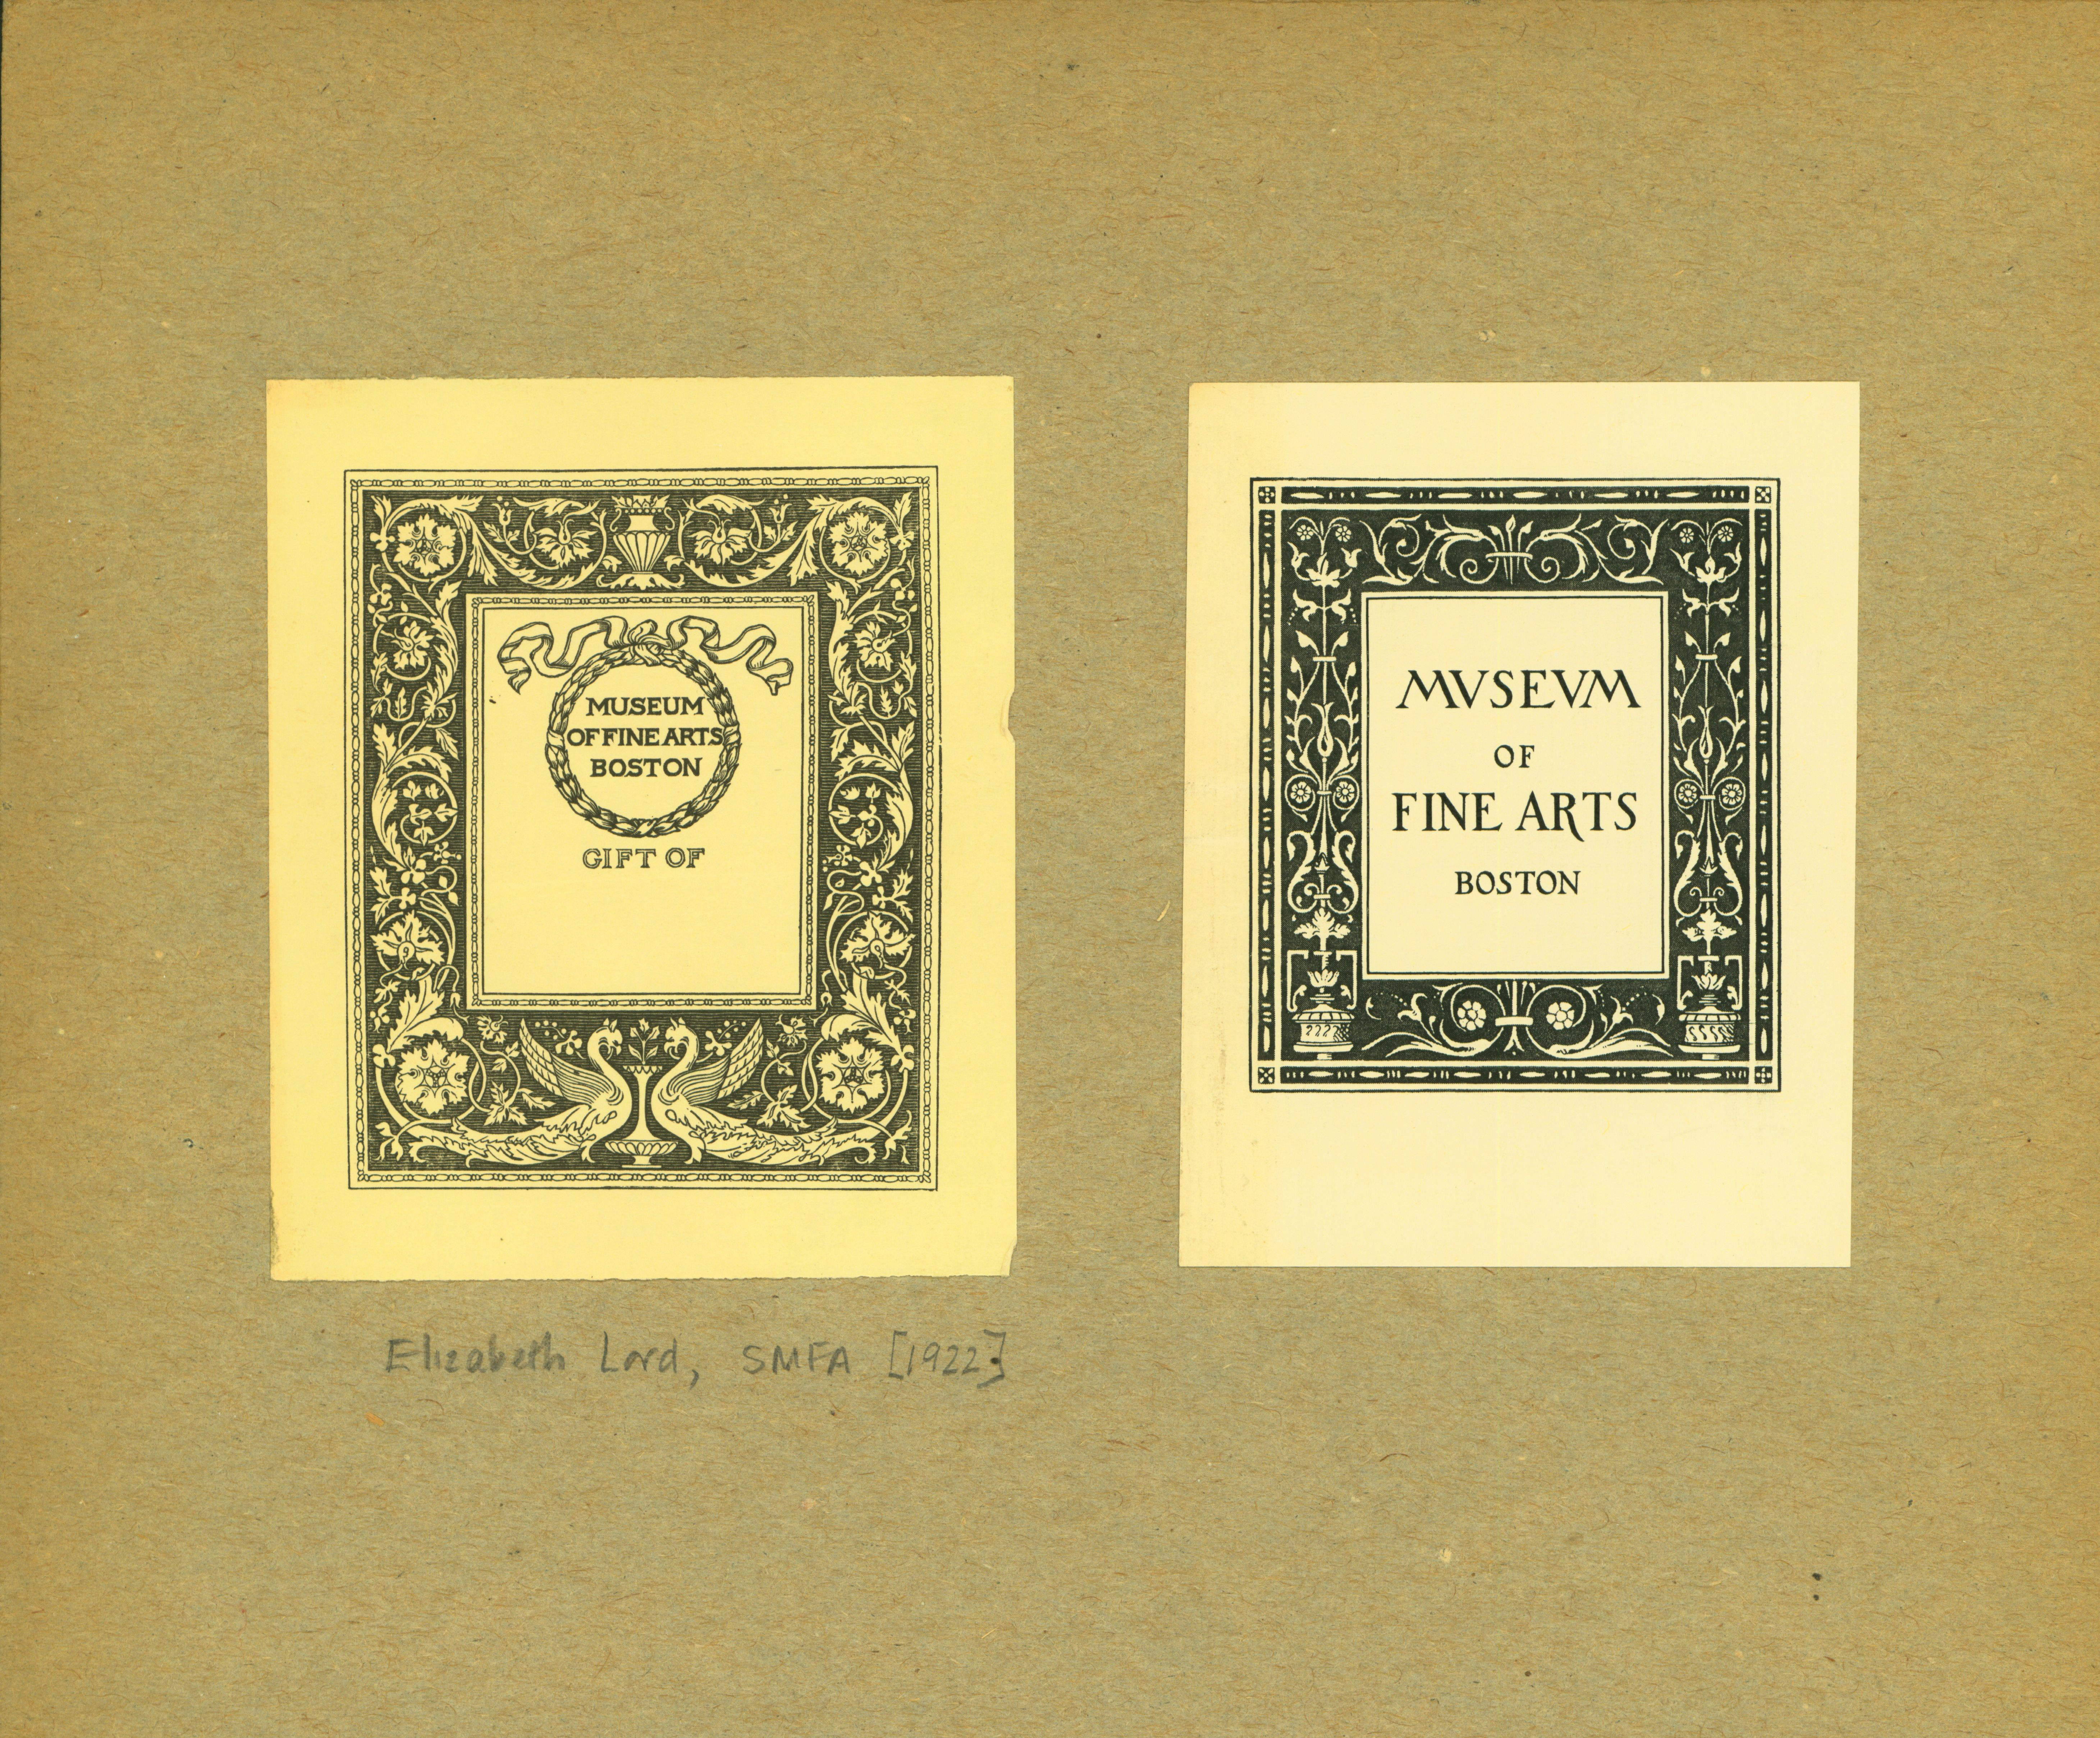 Scan of Museum of Fine Arts bookplates by Elizabeth Lord.